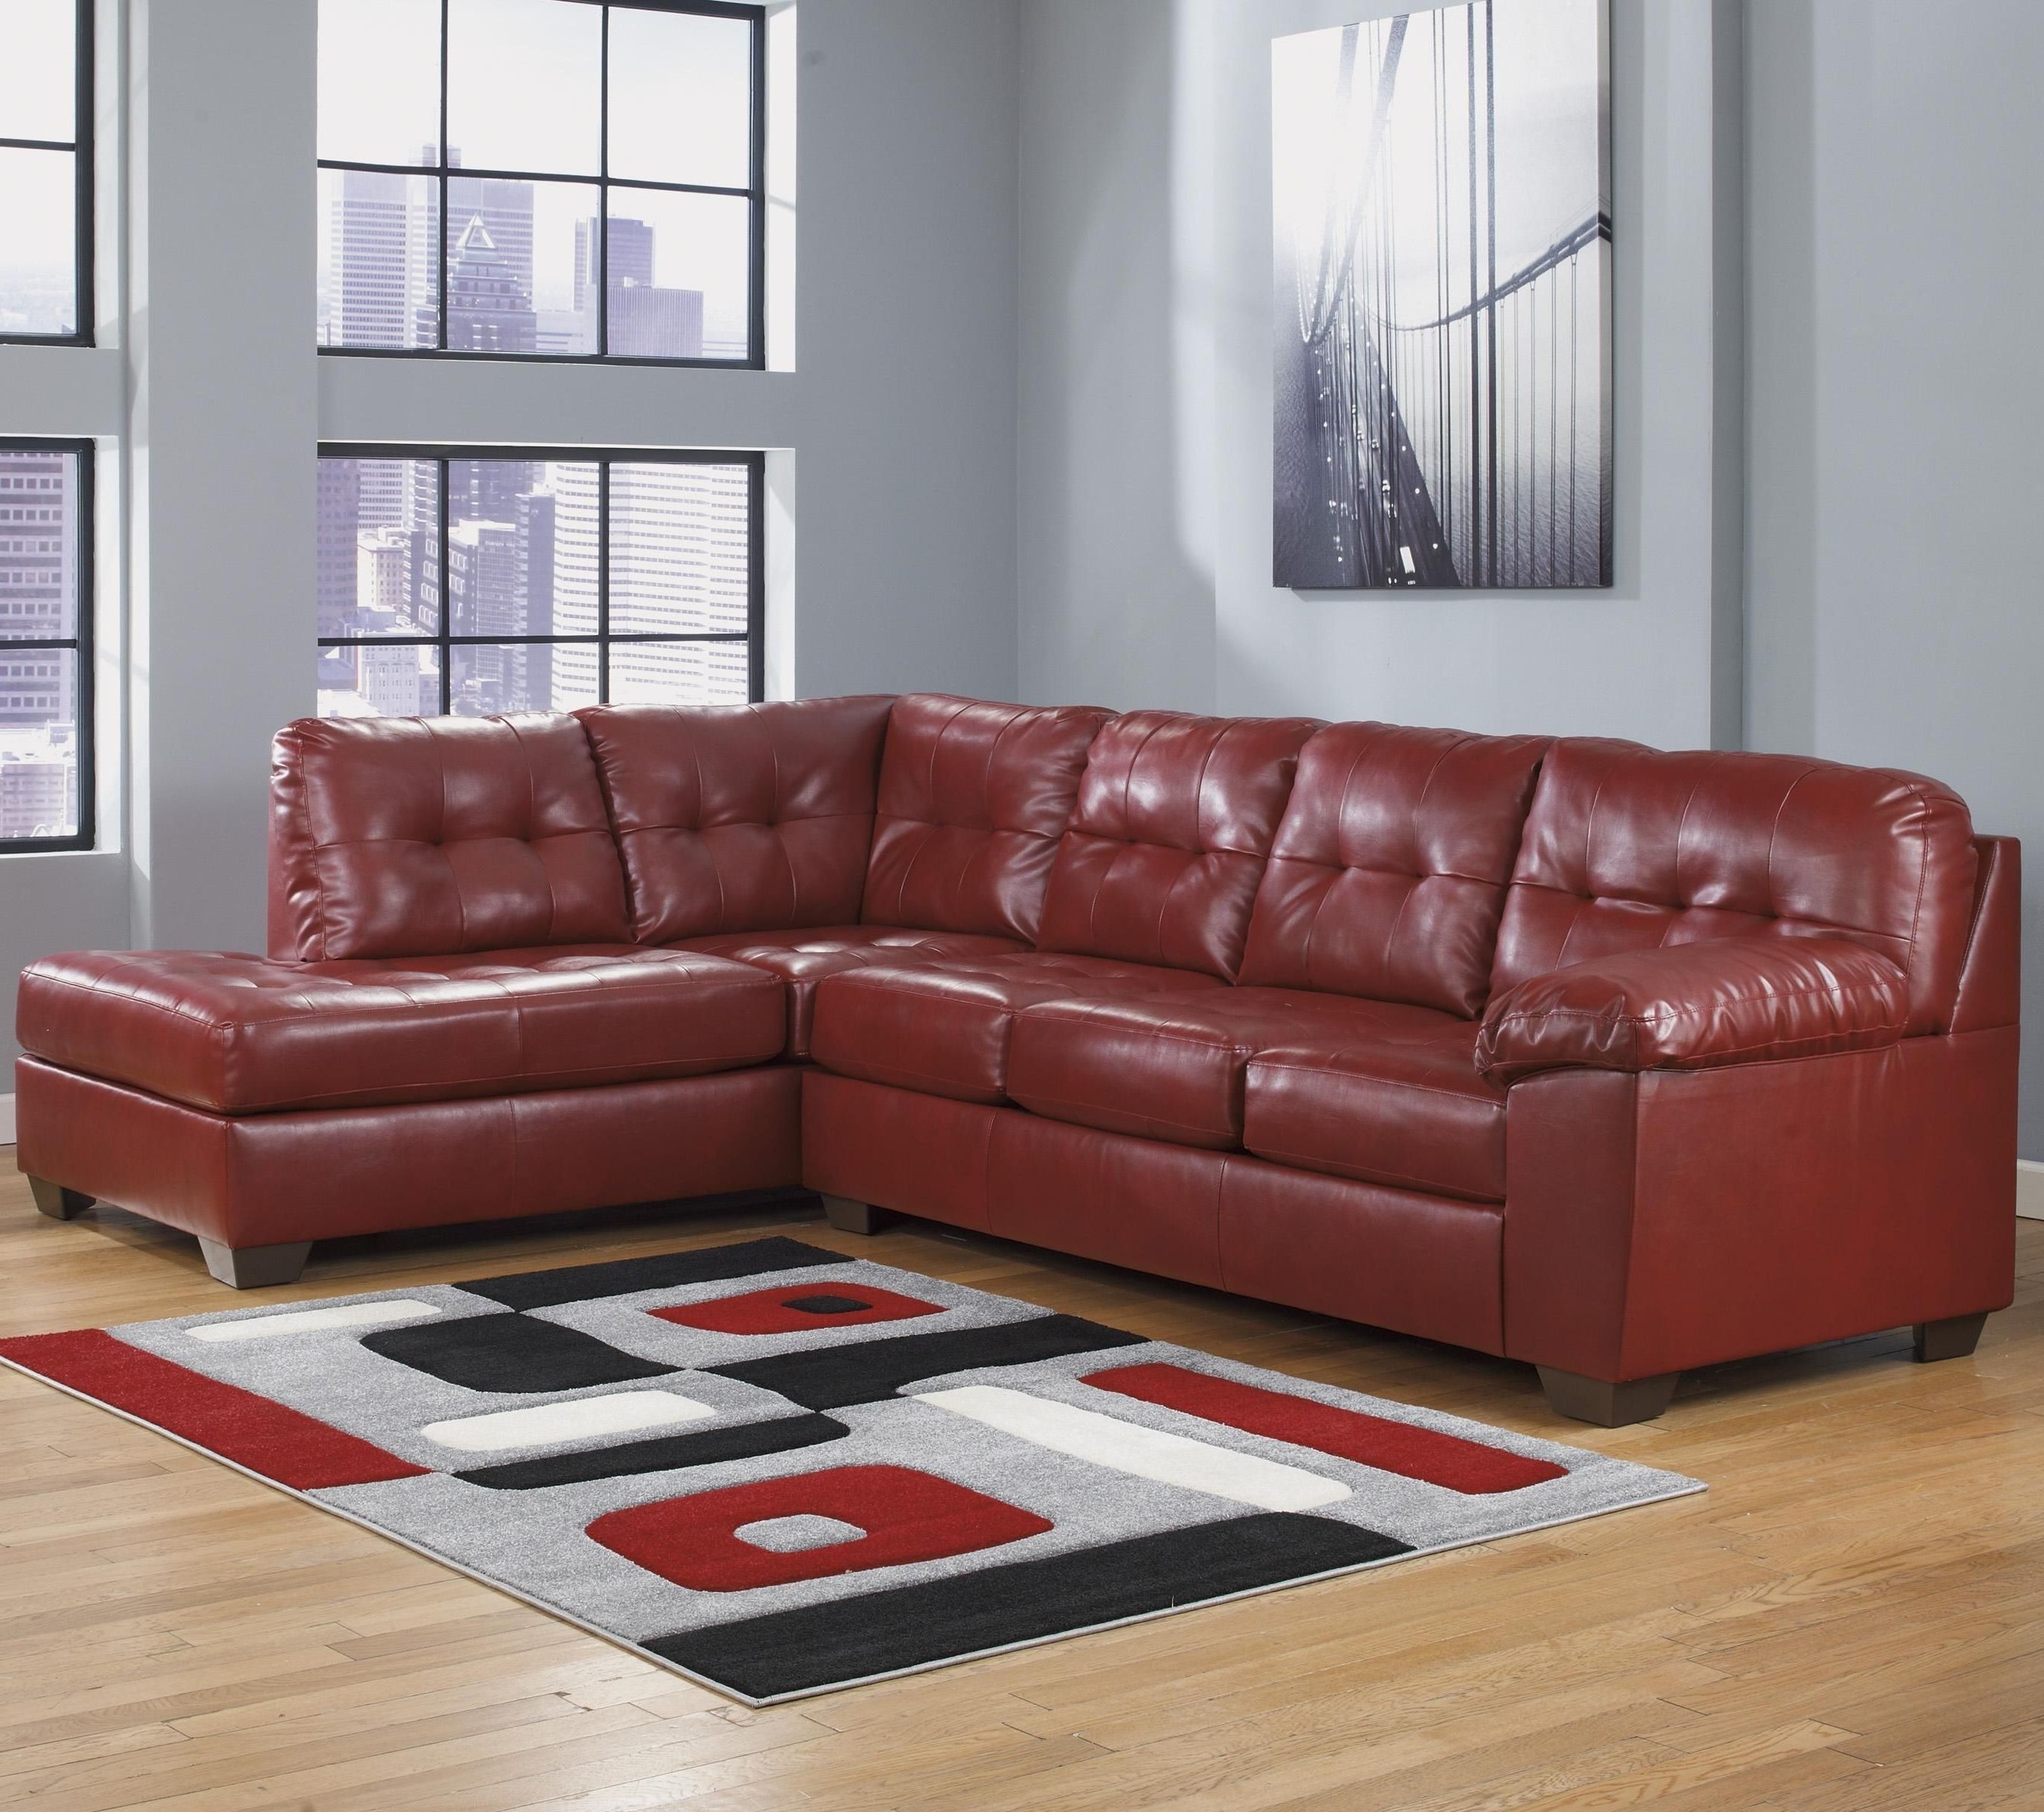 Featured Photo of 15 Best Ivan Smith Sectional Sofas